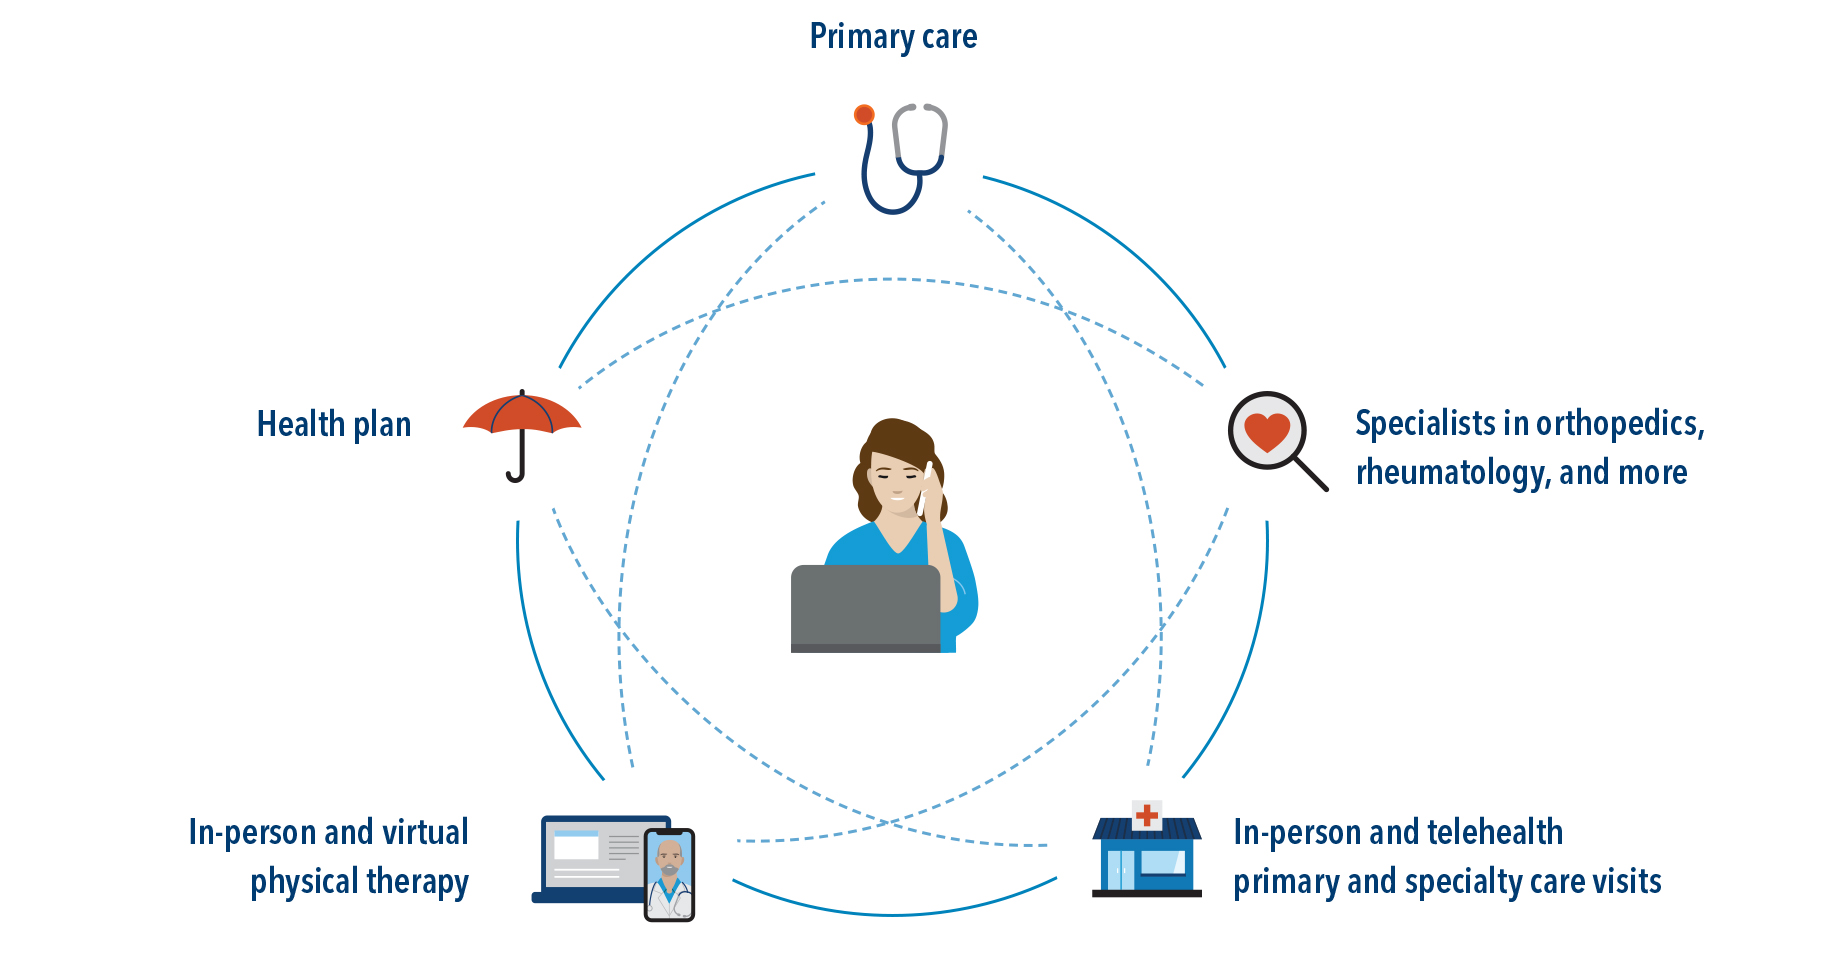 Primary care, health plan, in-person and virtual PT, telehealth visits, and specialists in orthopedics, rheumatology, and more are connected.